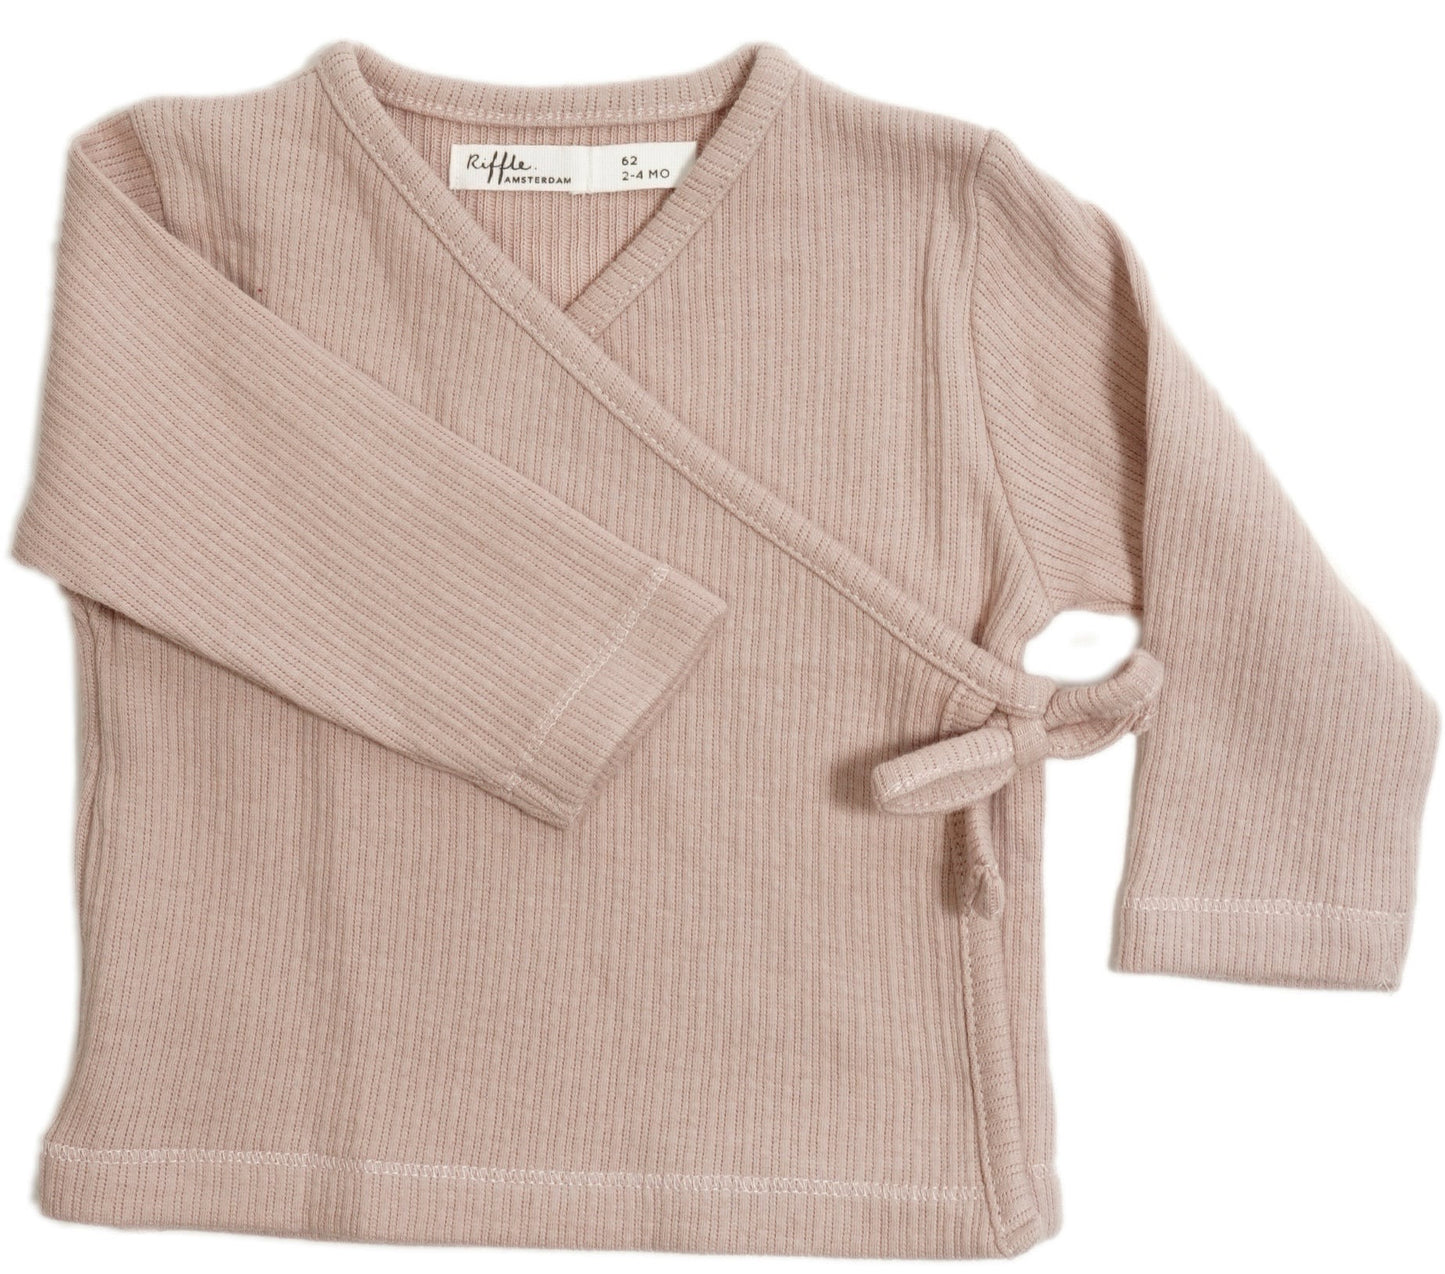 This picture show a organic cotton soft pink baby cardigan with a kimono fastening